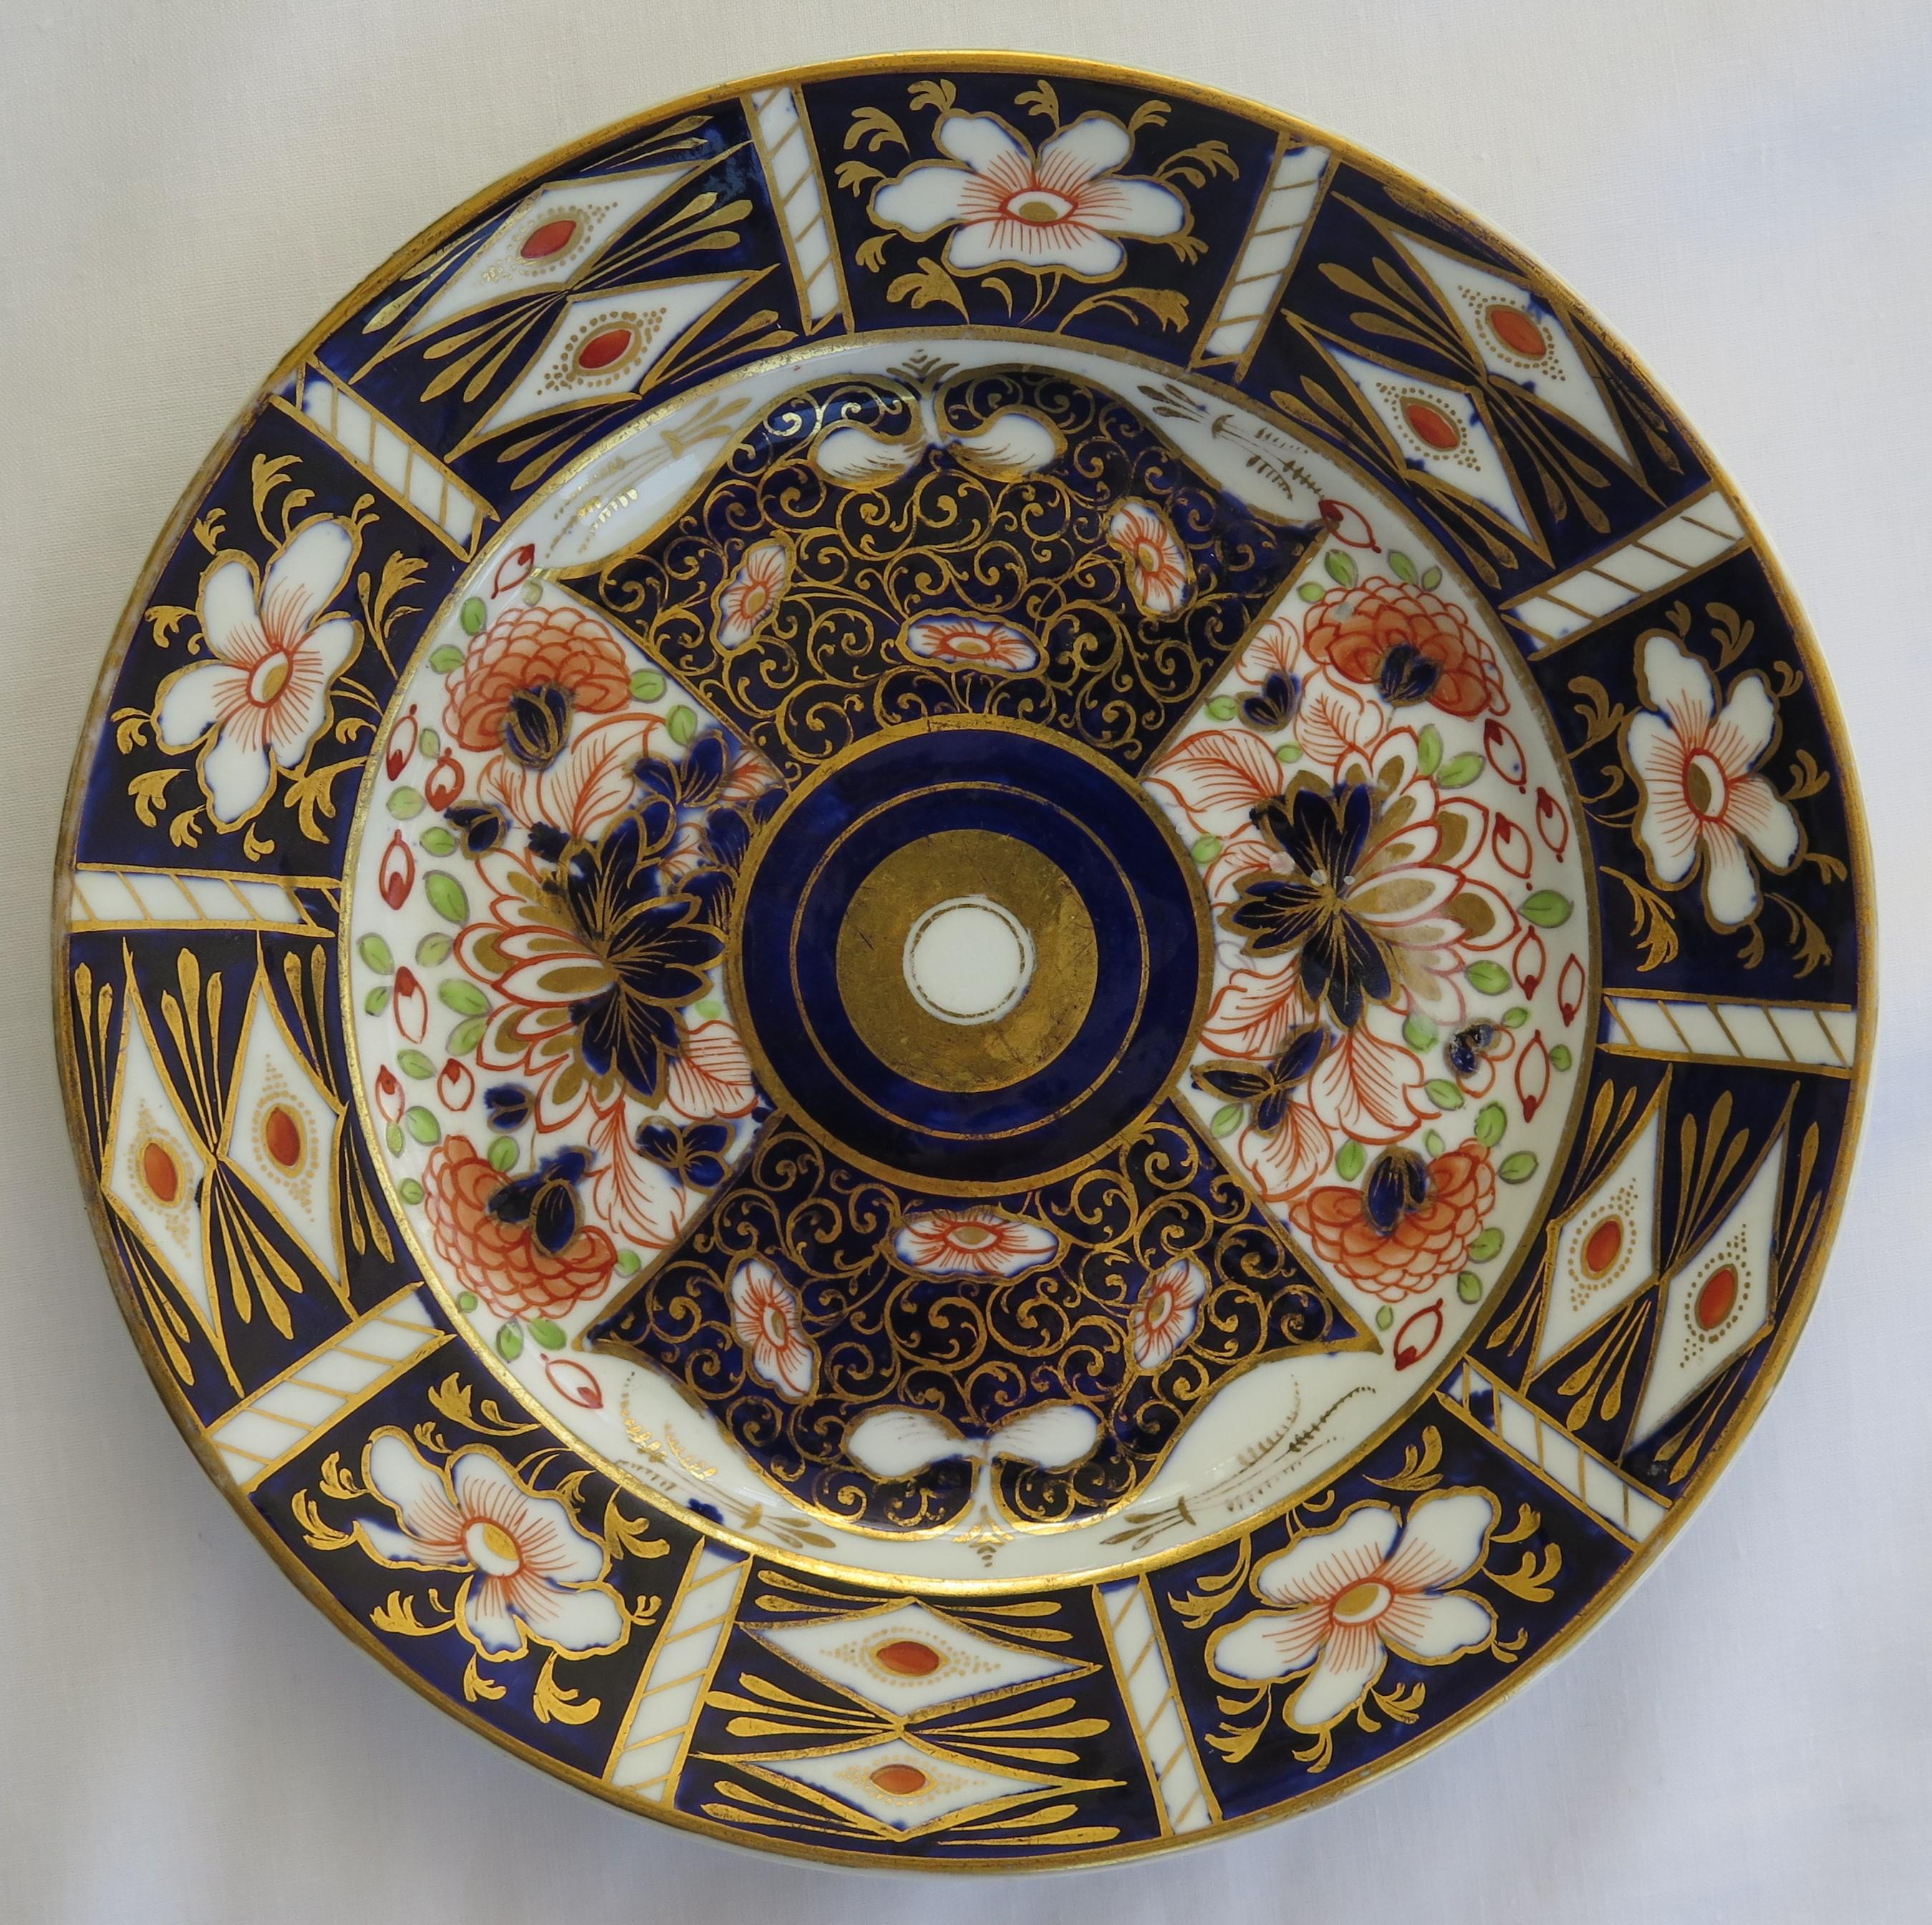 19th Century SIX Davenport Porcelain Plates Hand Painted and Gilded Pattern, Circa 1870 For Sale